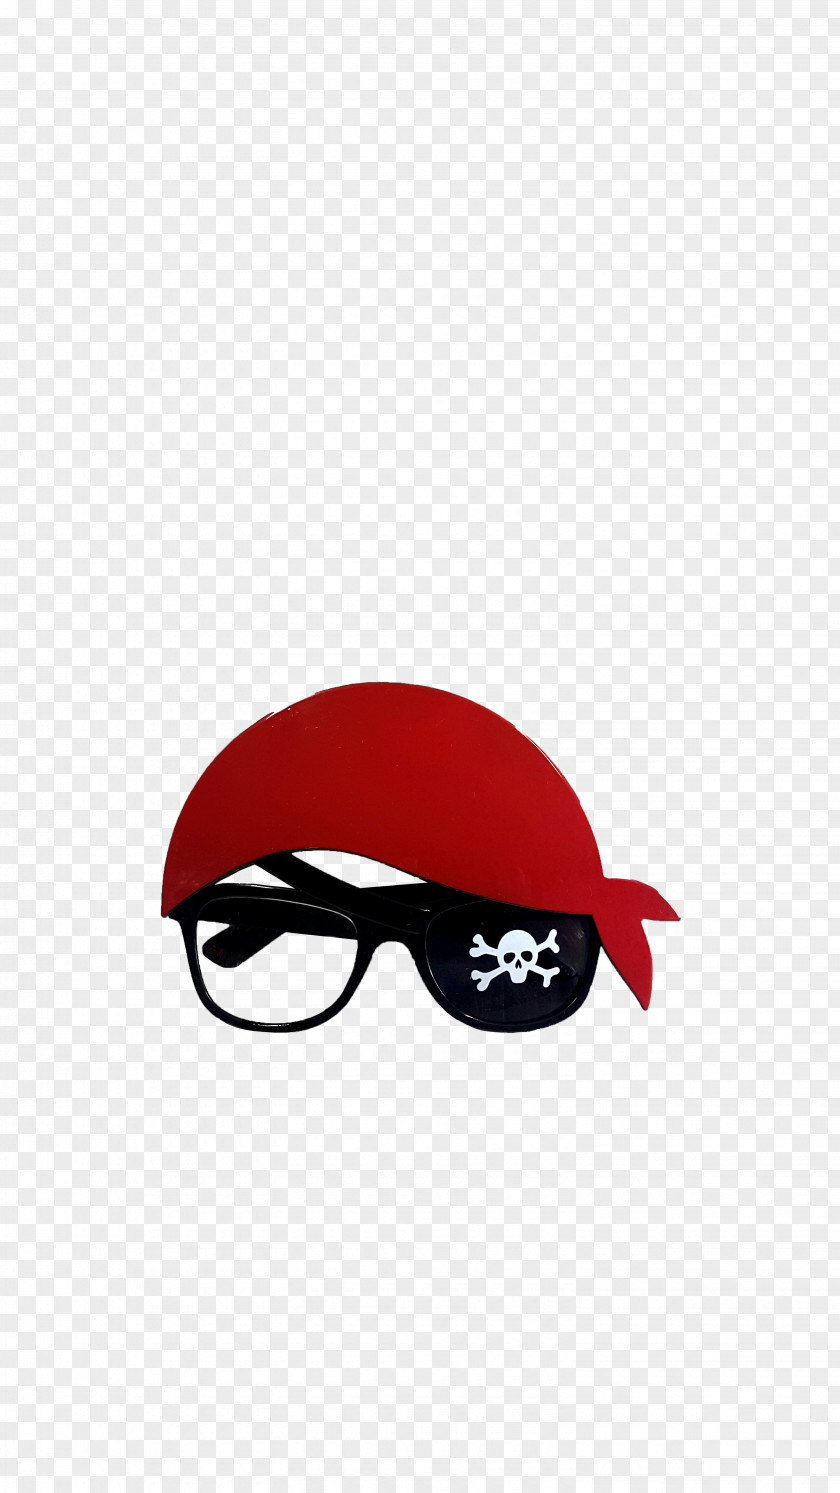 Glasses Goggles Sunglasses Party Retail PNG